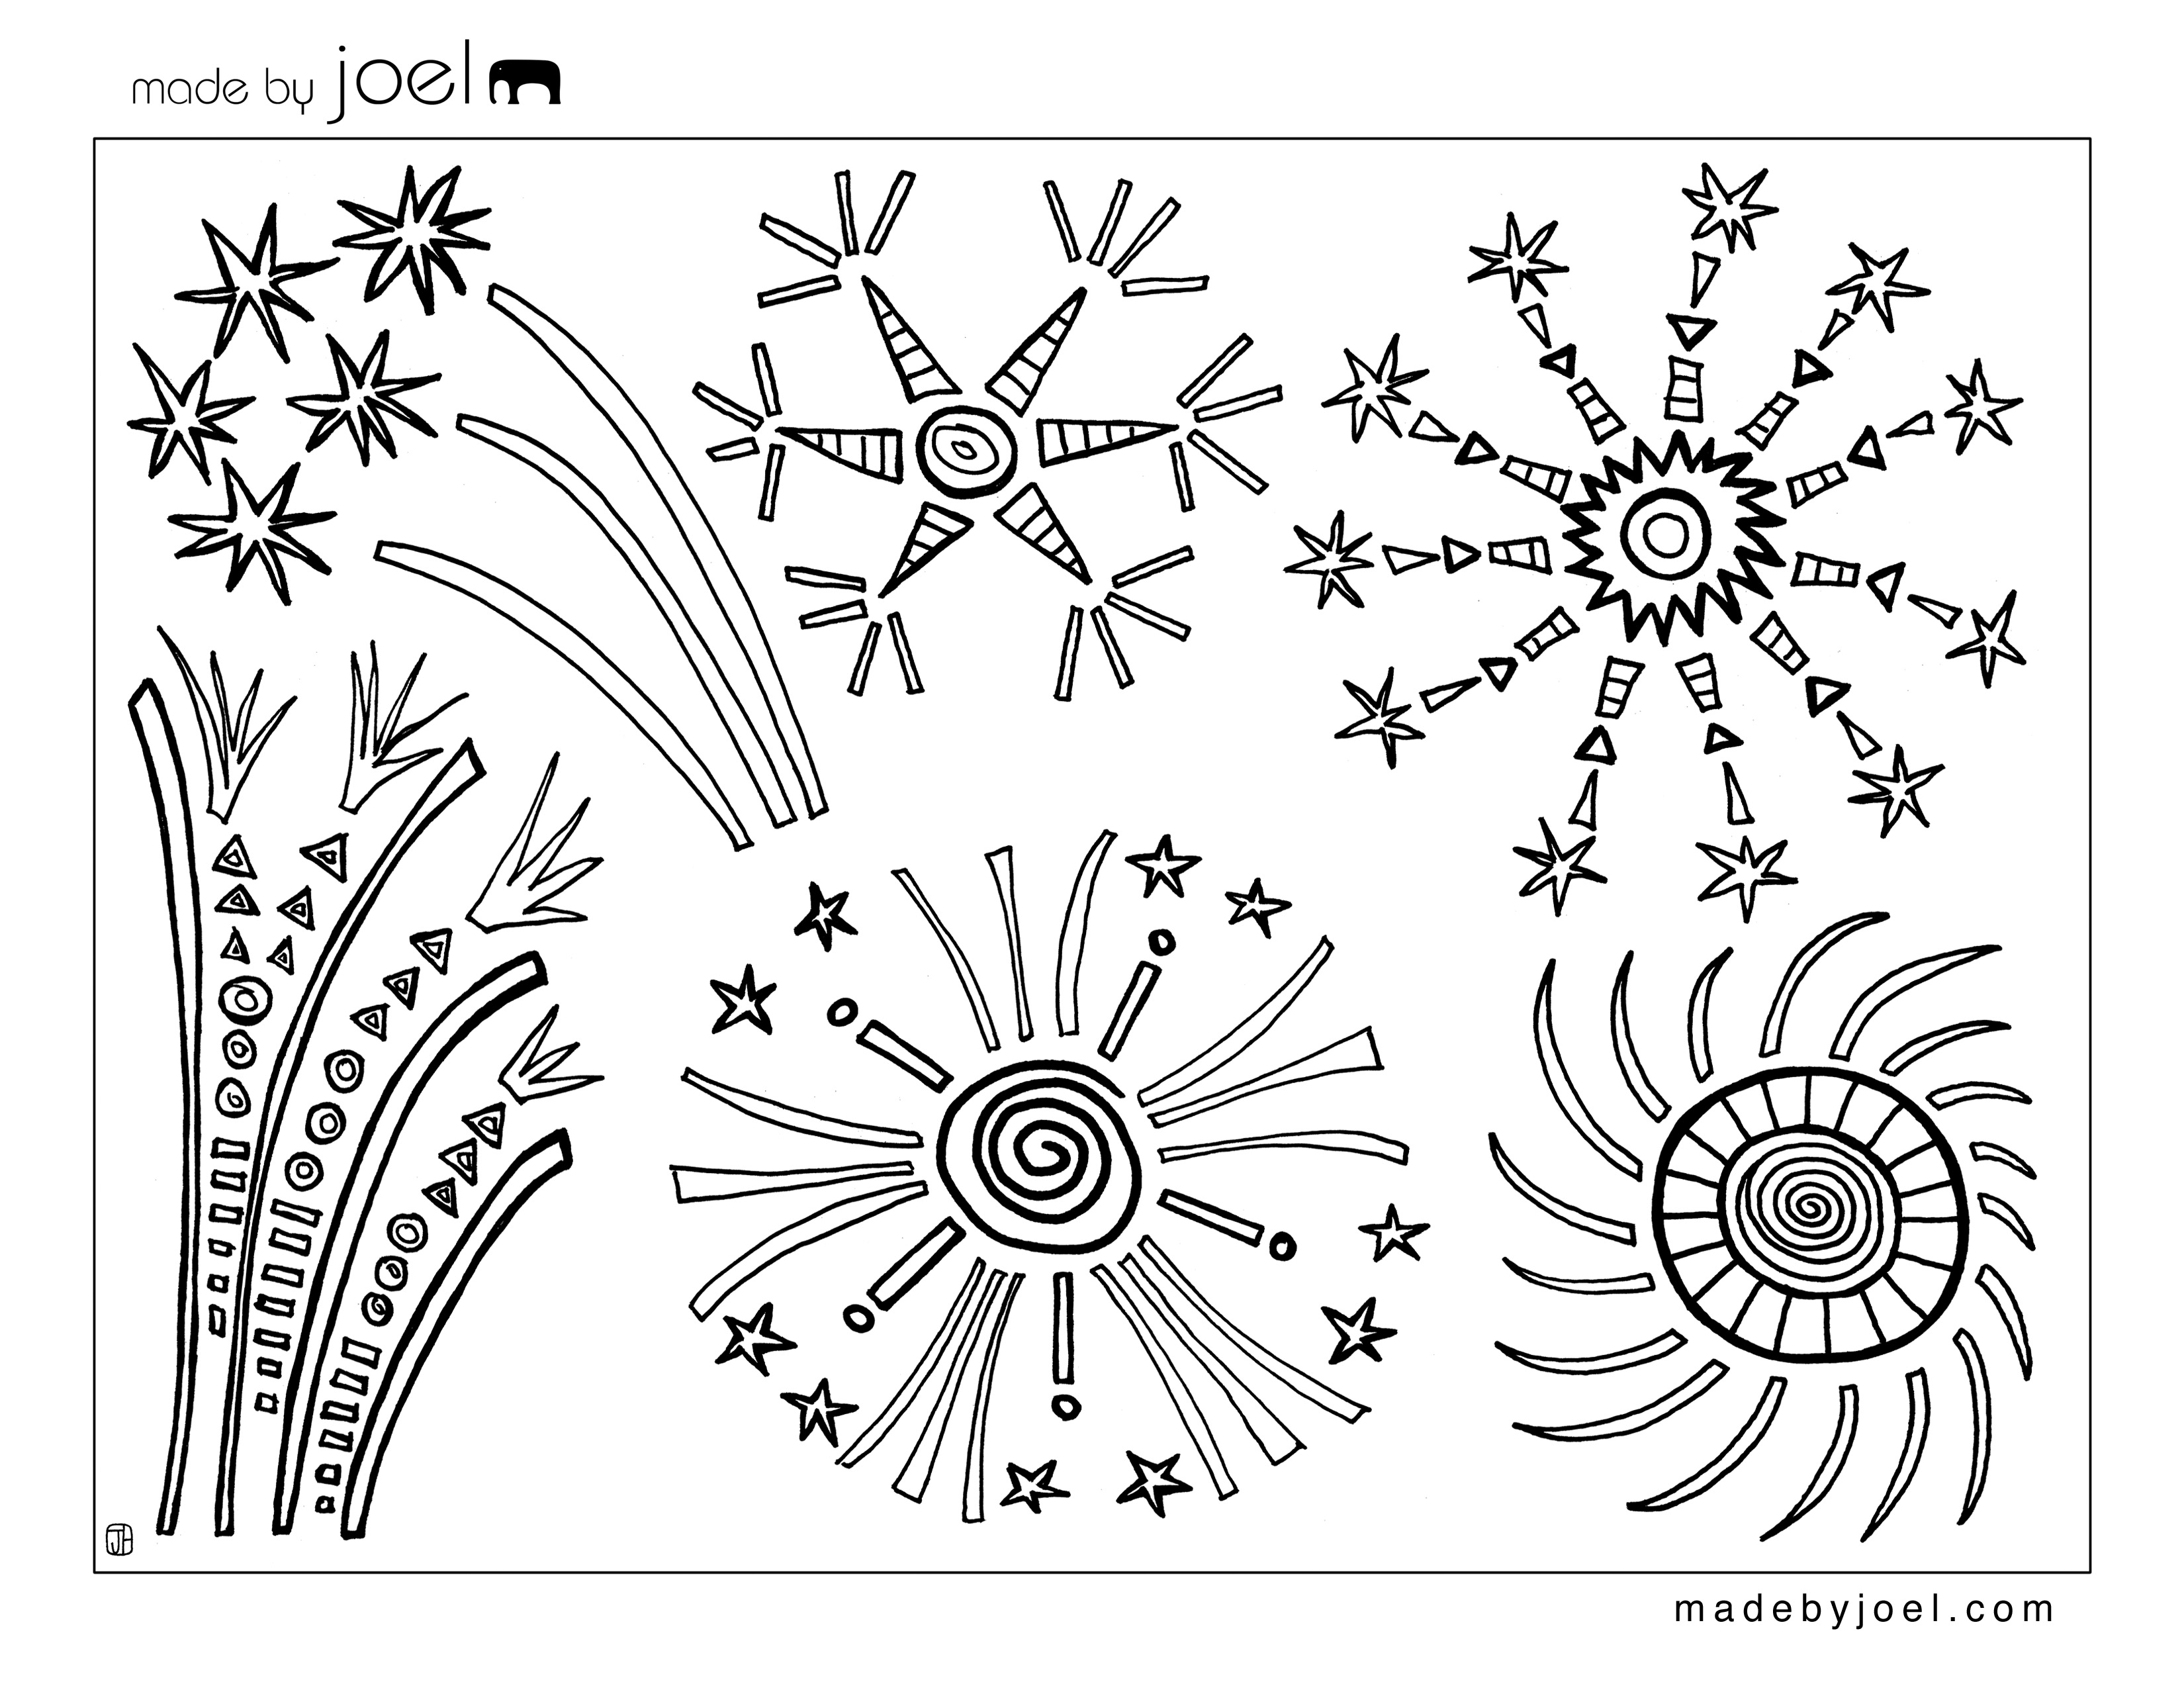 june coloring pages to print